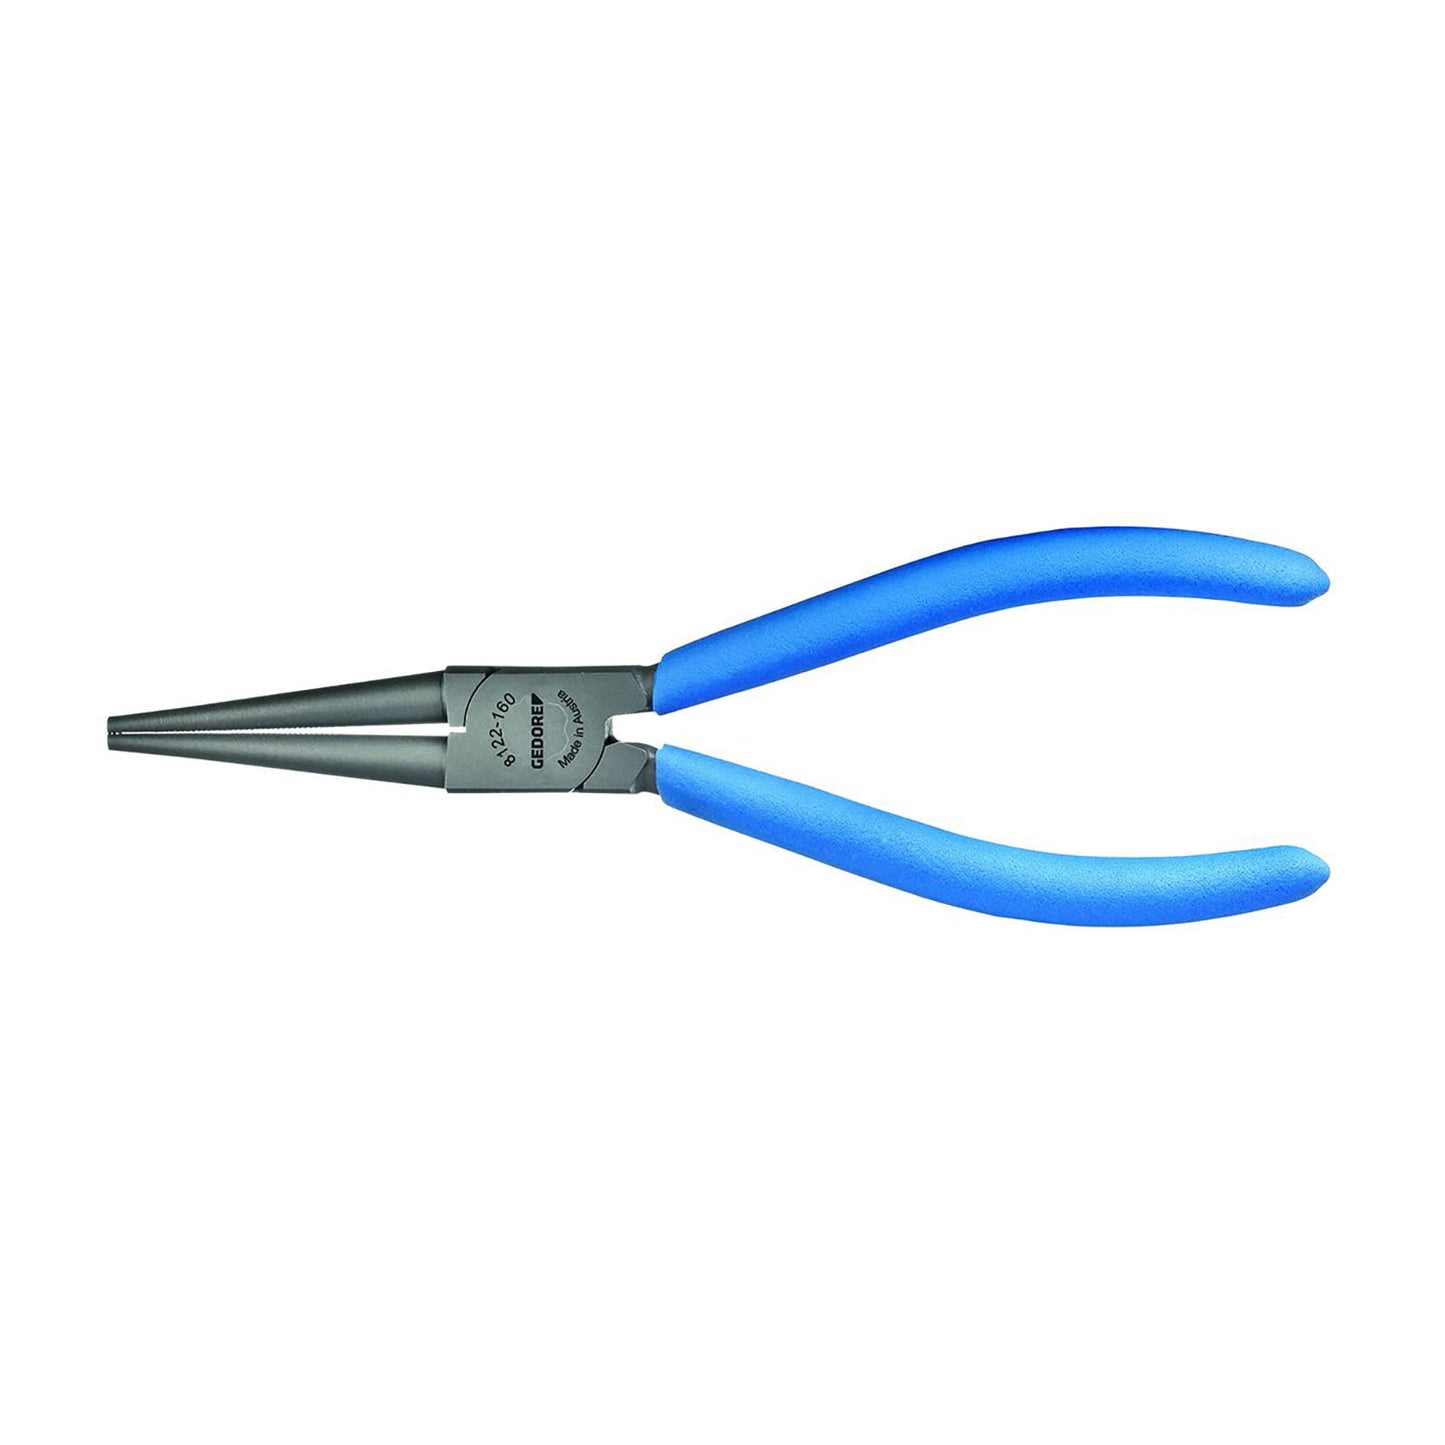 GEDORE 8122-160 TL - Round nose pliers 160 mm (6710530)